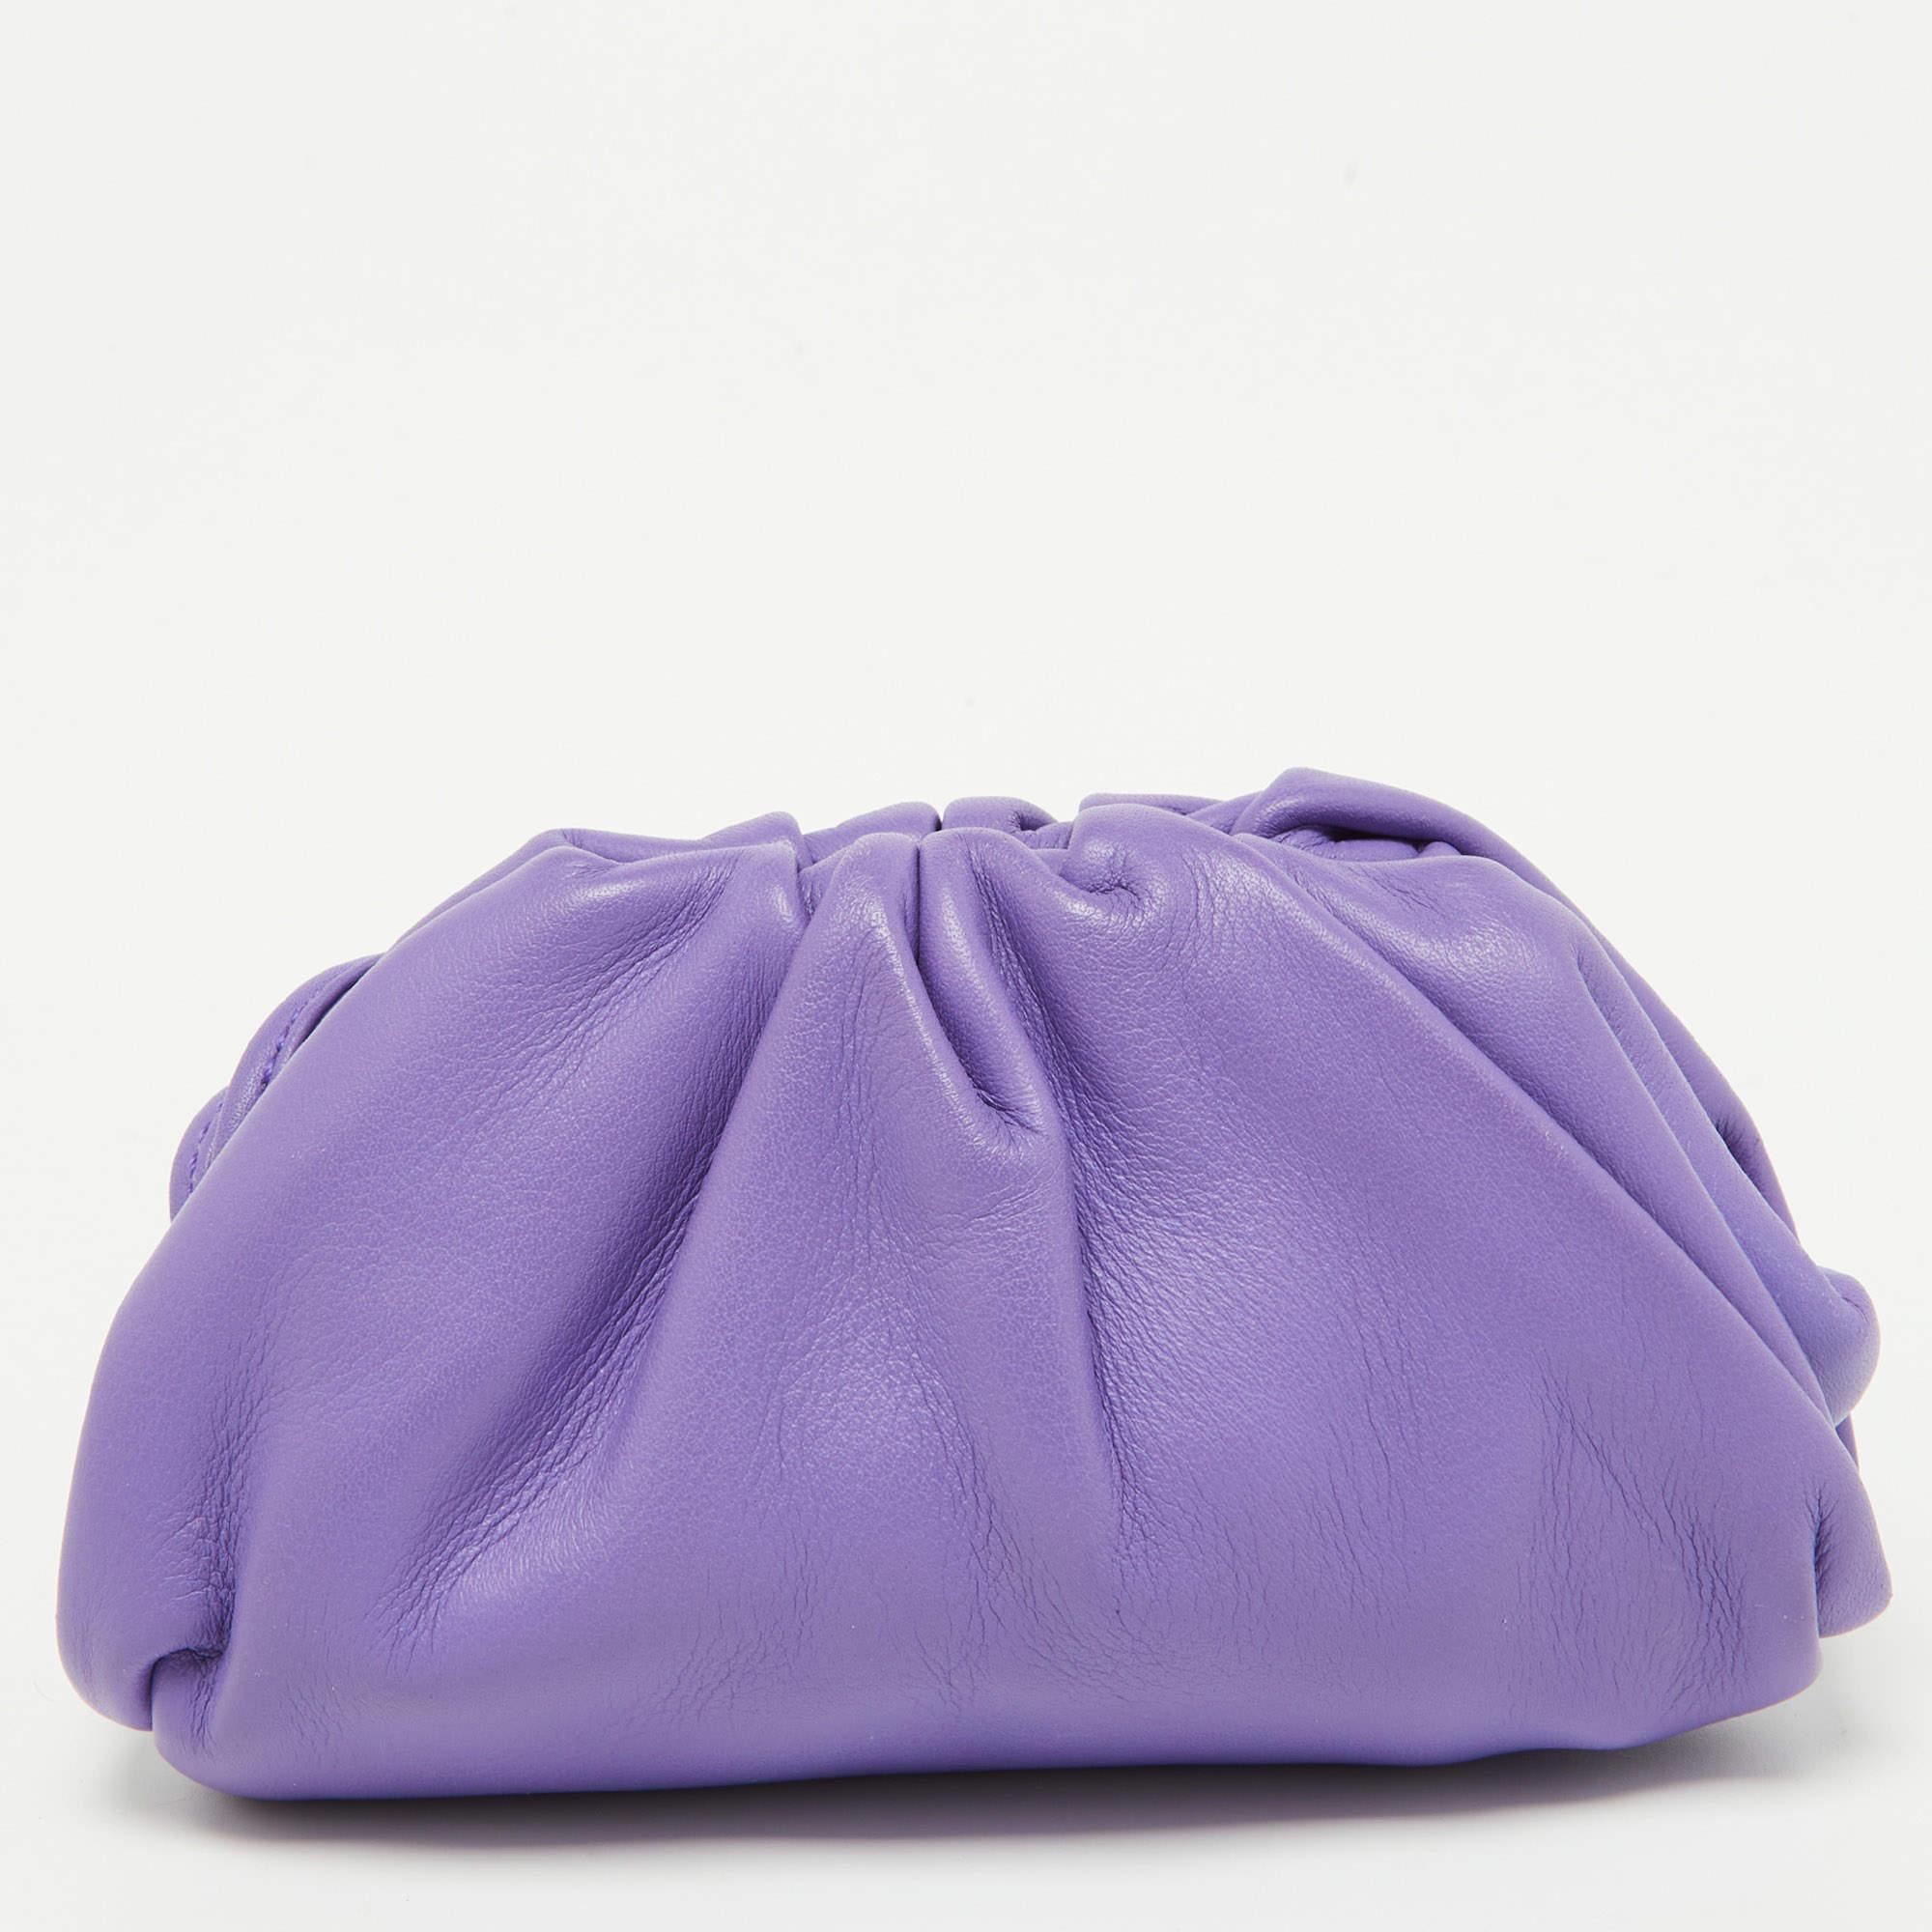 Made from supple purple leather, it features a sleek, minimalist design with a secure zip closure. The compact size makes it perfect for storing coins and small essentials while adding a touch of elegance to your ensemble.

